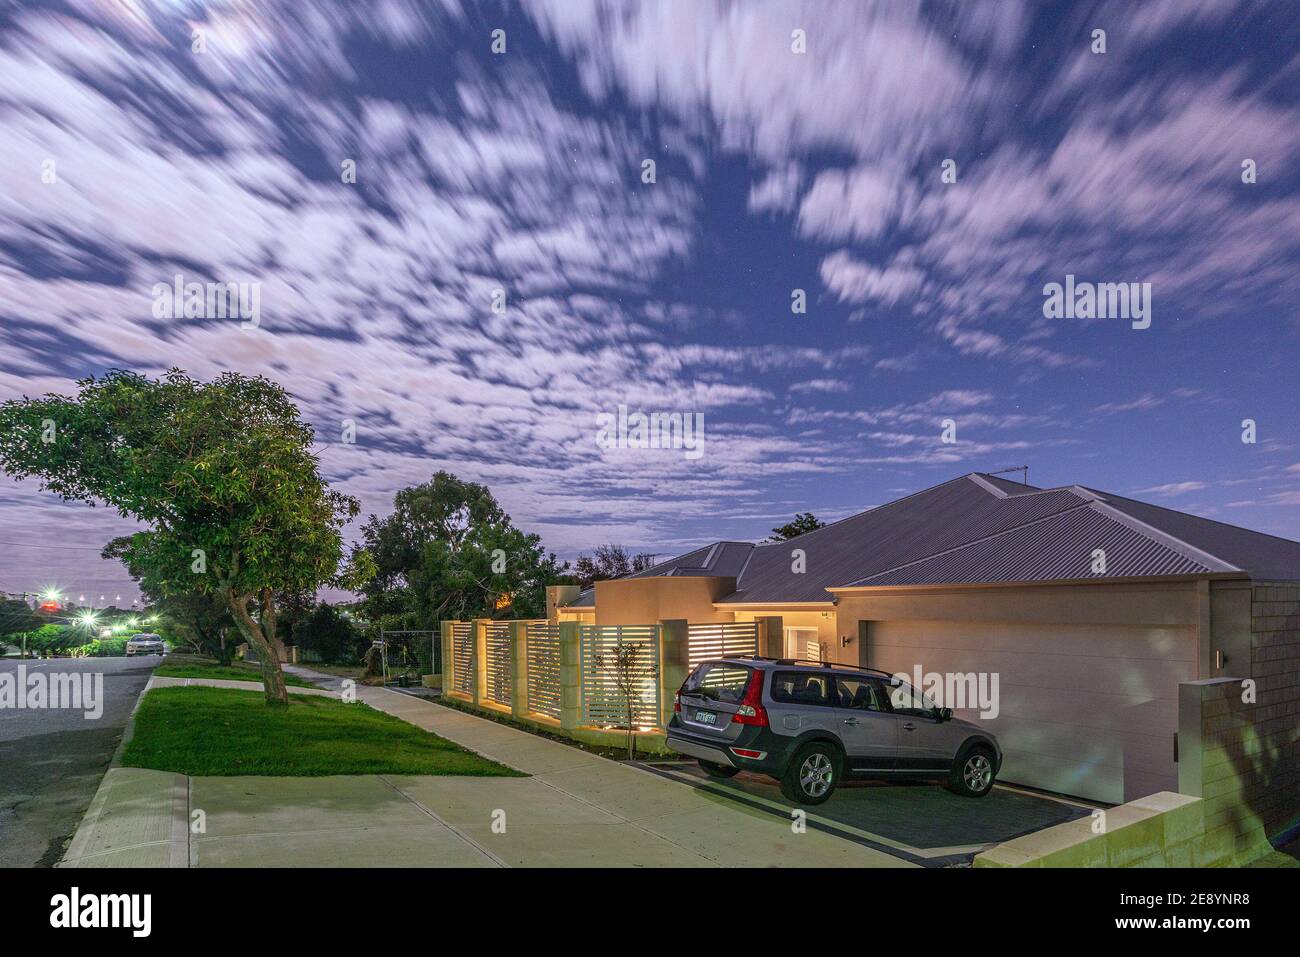 A night time exposure by moonlight of a modern Australian suburban street, with a Volvo car in a driveway. Stock Photo